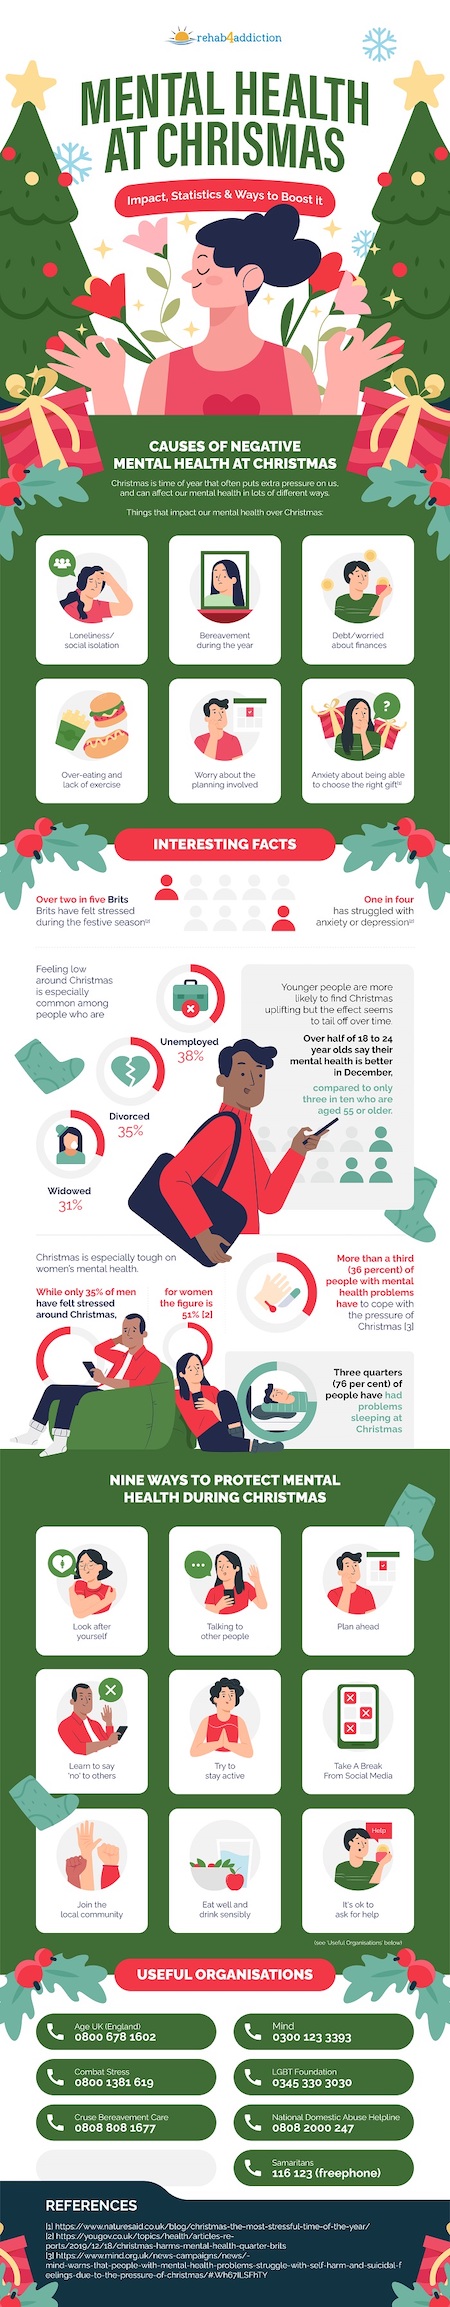 Mental health at Christmas infographic 